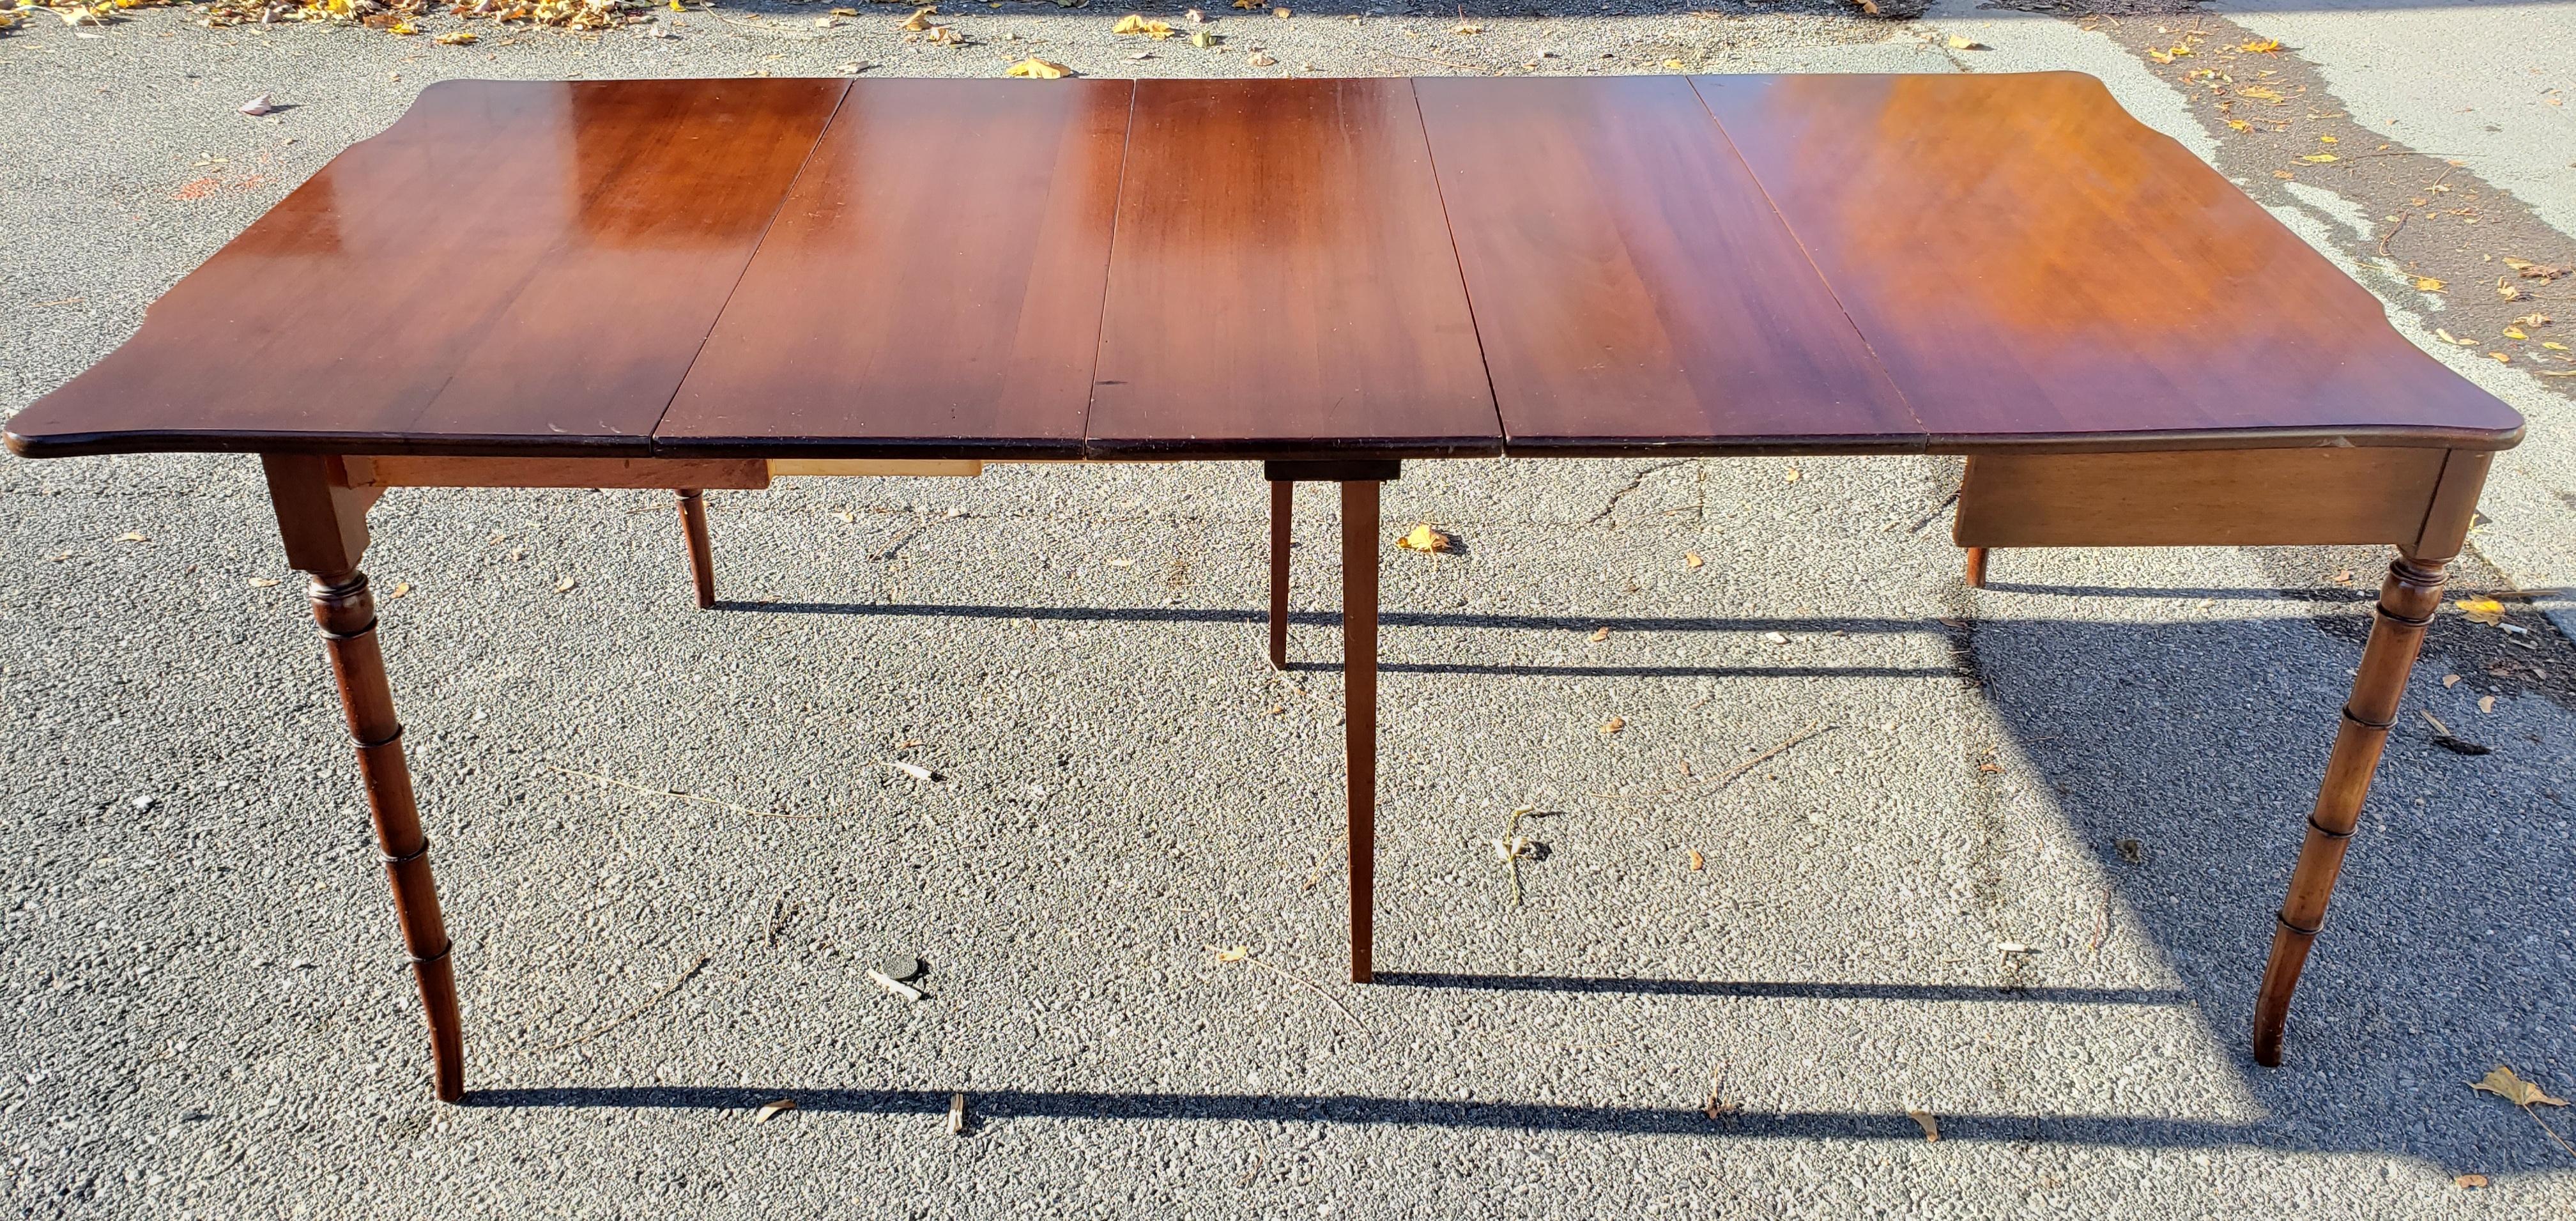 Beautiful and versatile solid walnut table. Very elegant console table. Flip the top Open to unveil a square game table. Pull slides open to insert one, two or 3 leaves for a beautiful full sized dining table or occasional buffet table. This table